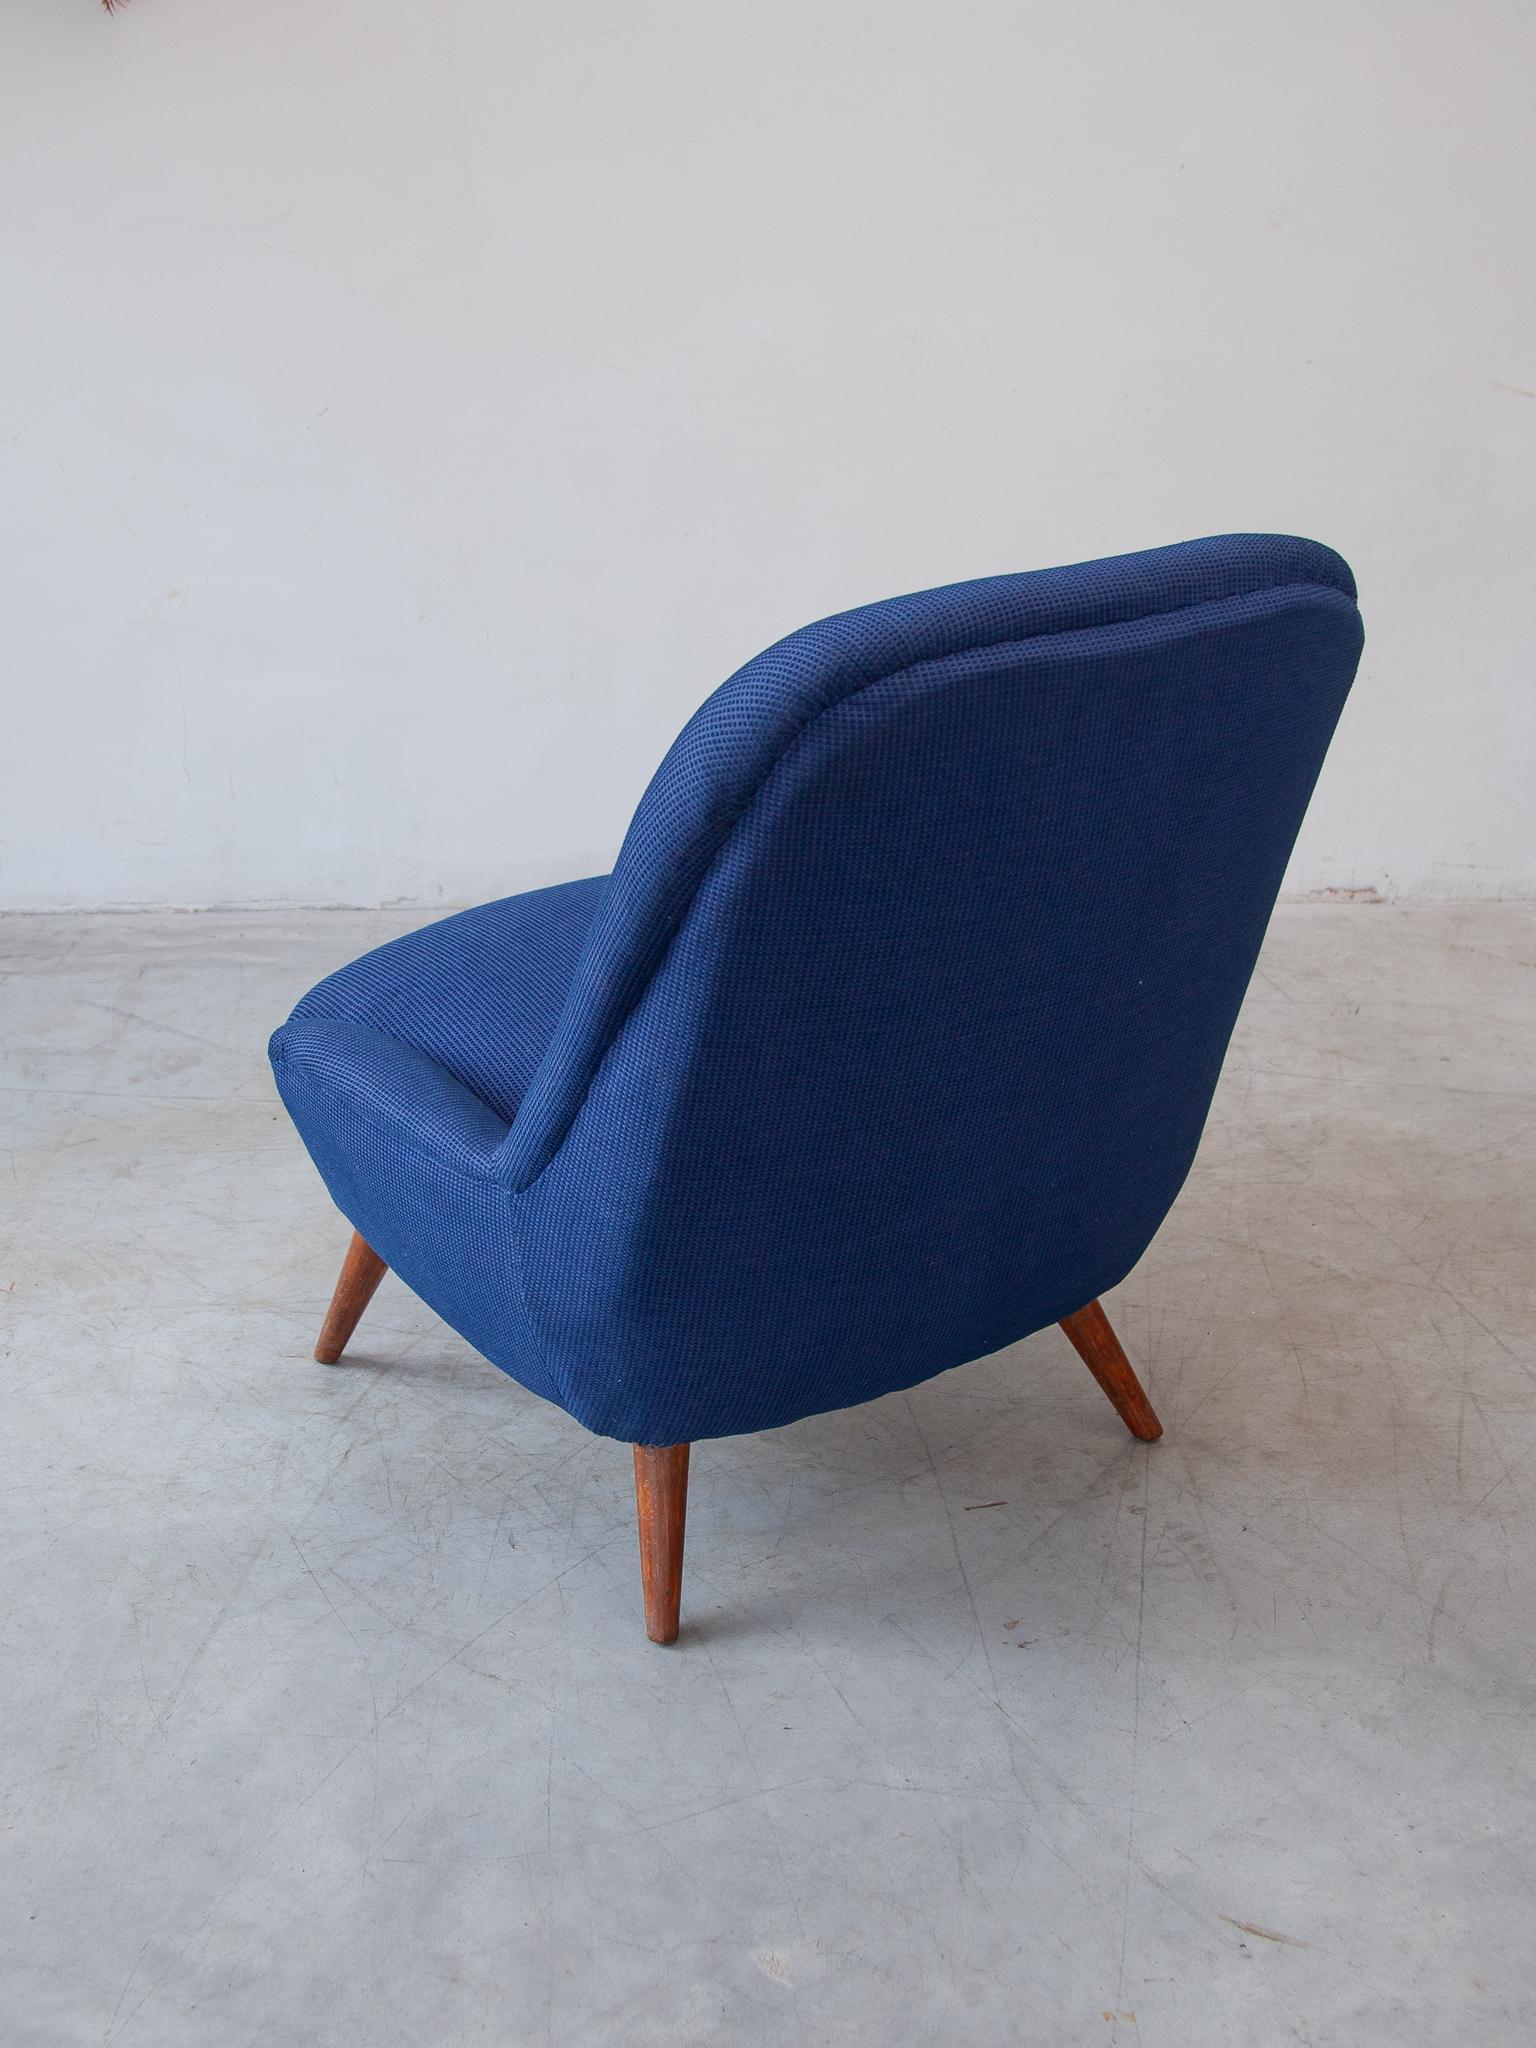 Hand-Crafted Midcentury Modern 1950s Blue Fabric, Lounge Arm Chair, Scandinavian Design For Sale